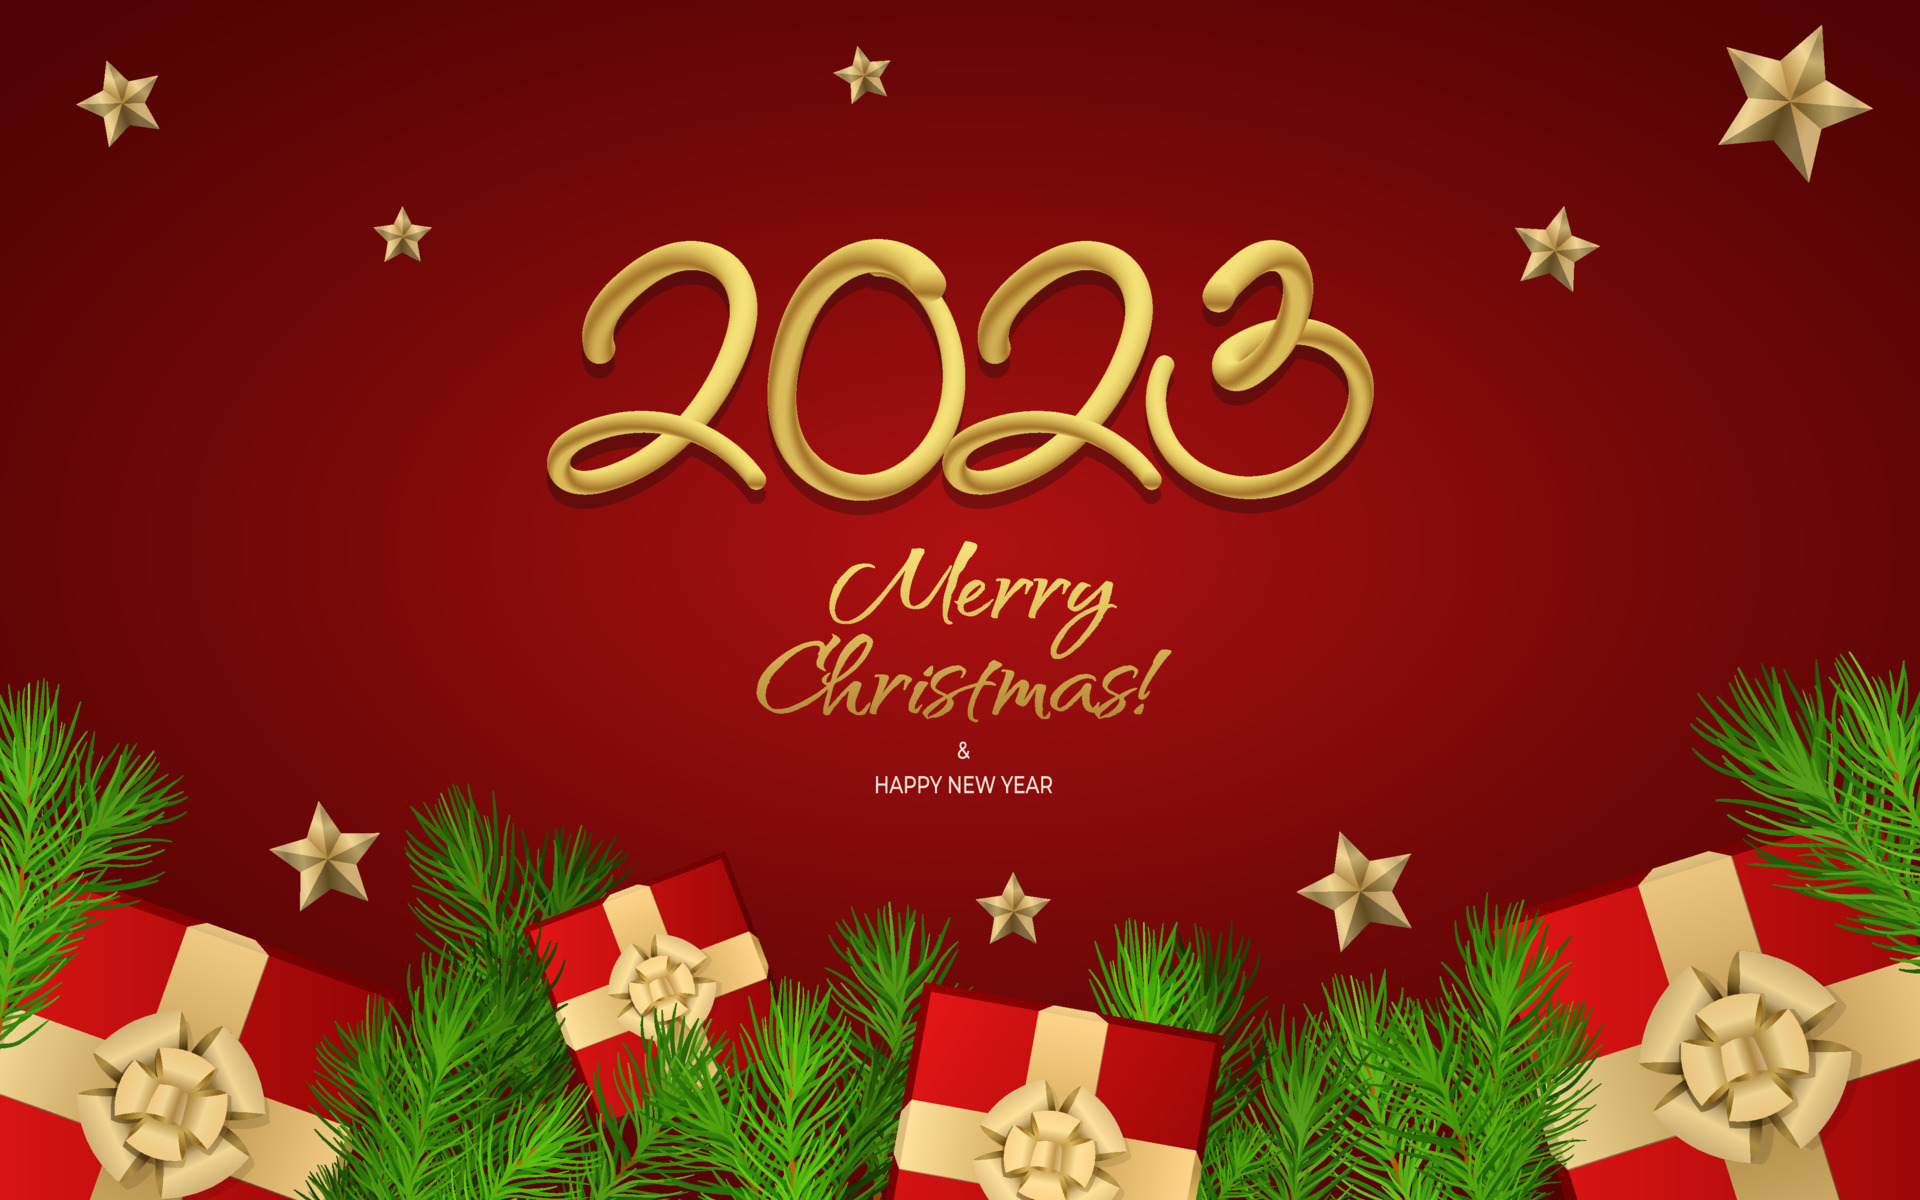 Happy new year 2023 greeting vector. Merry Christmas design greeting text with colorful Christmas decor elements such as a gift, fir tree branch, stars on a red background with luxury gold